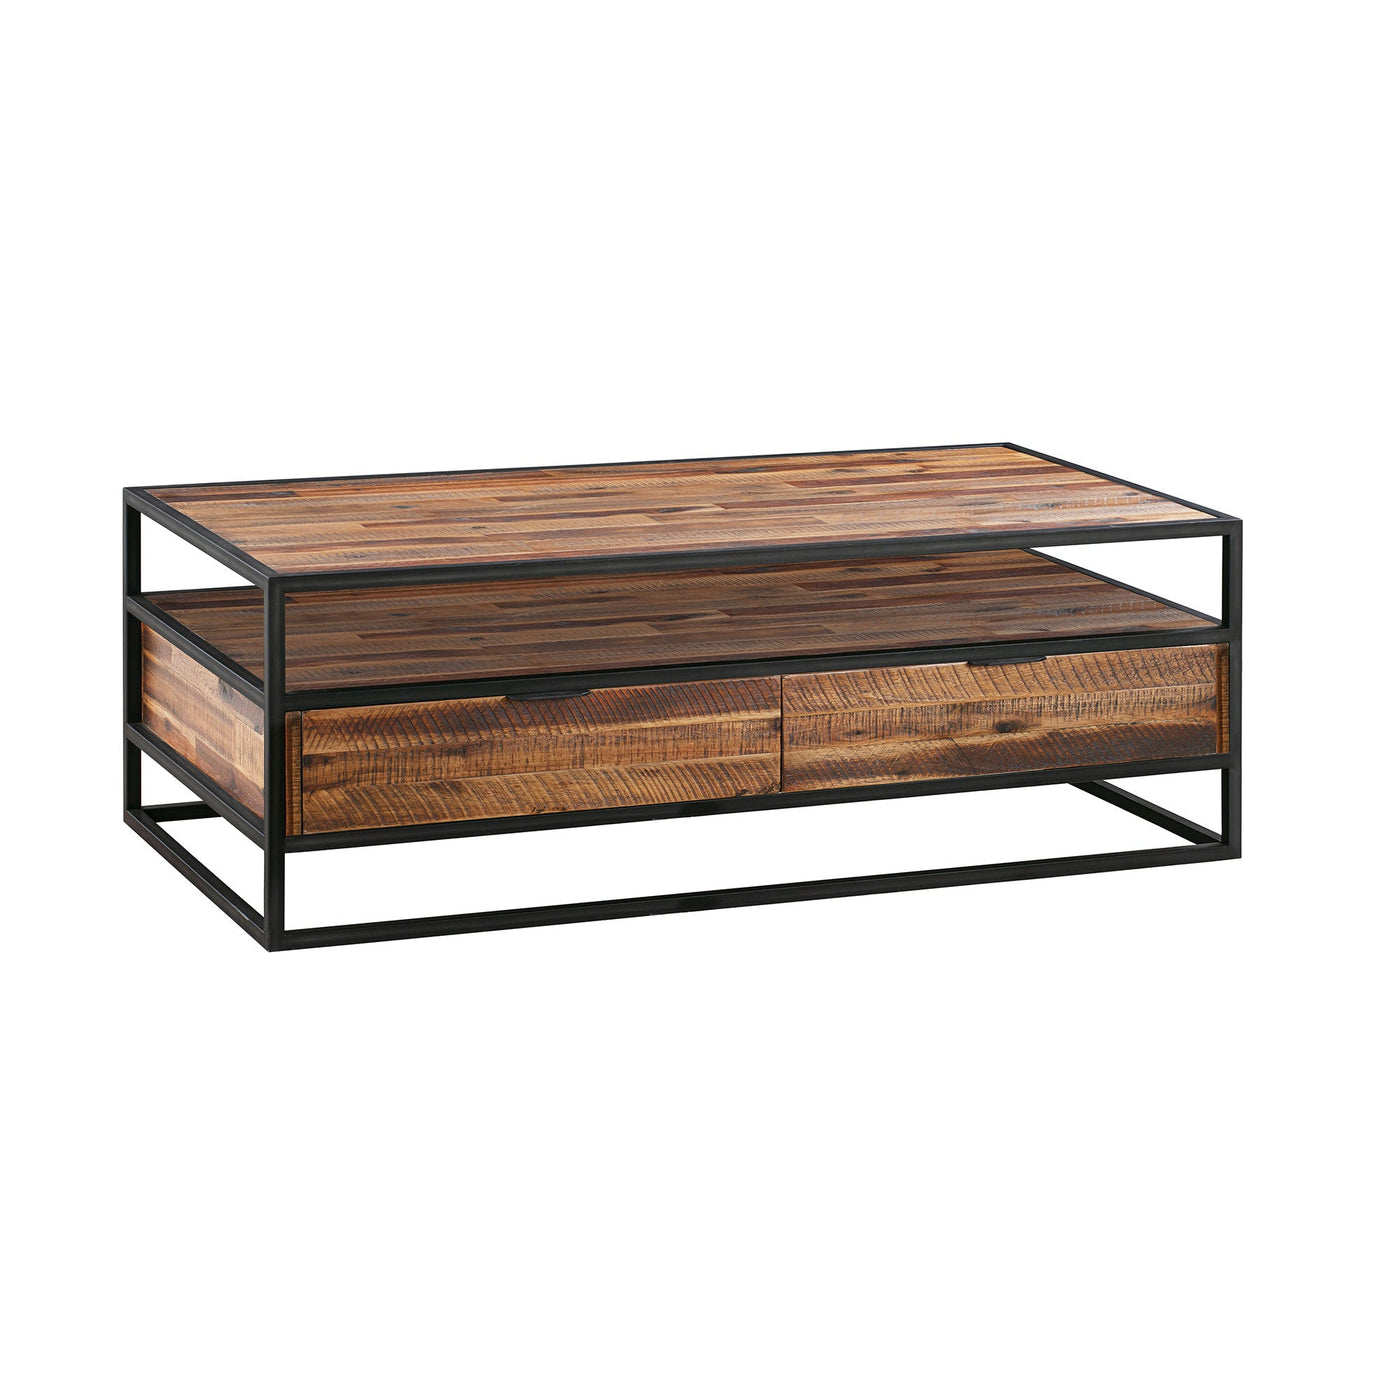 50’ Brown And Black Solid Wood And Metal Coffee Table With Two Drawers And Shelf - Coffee Tables